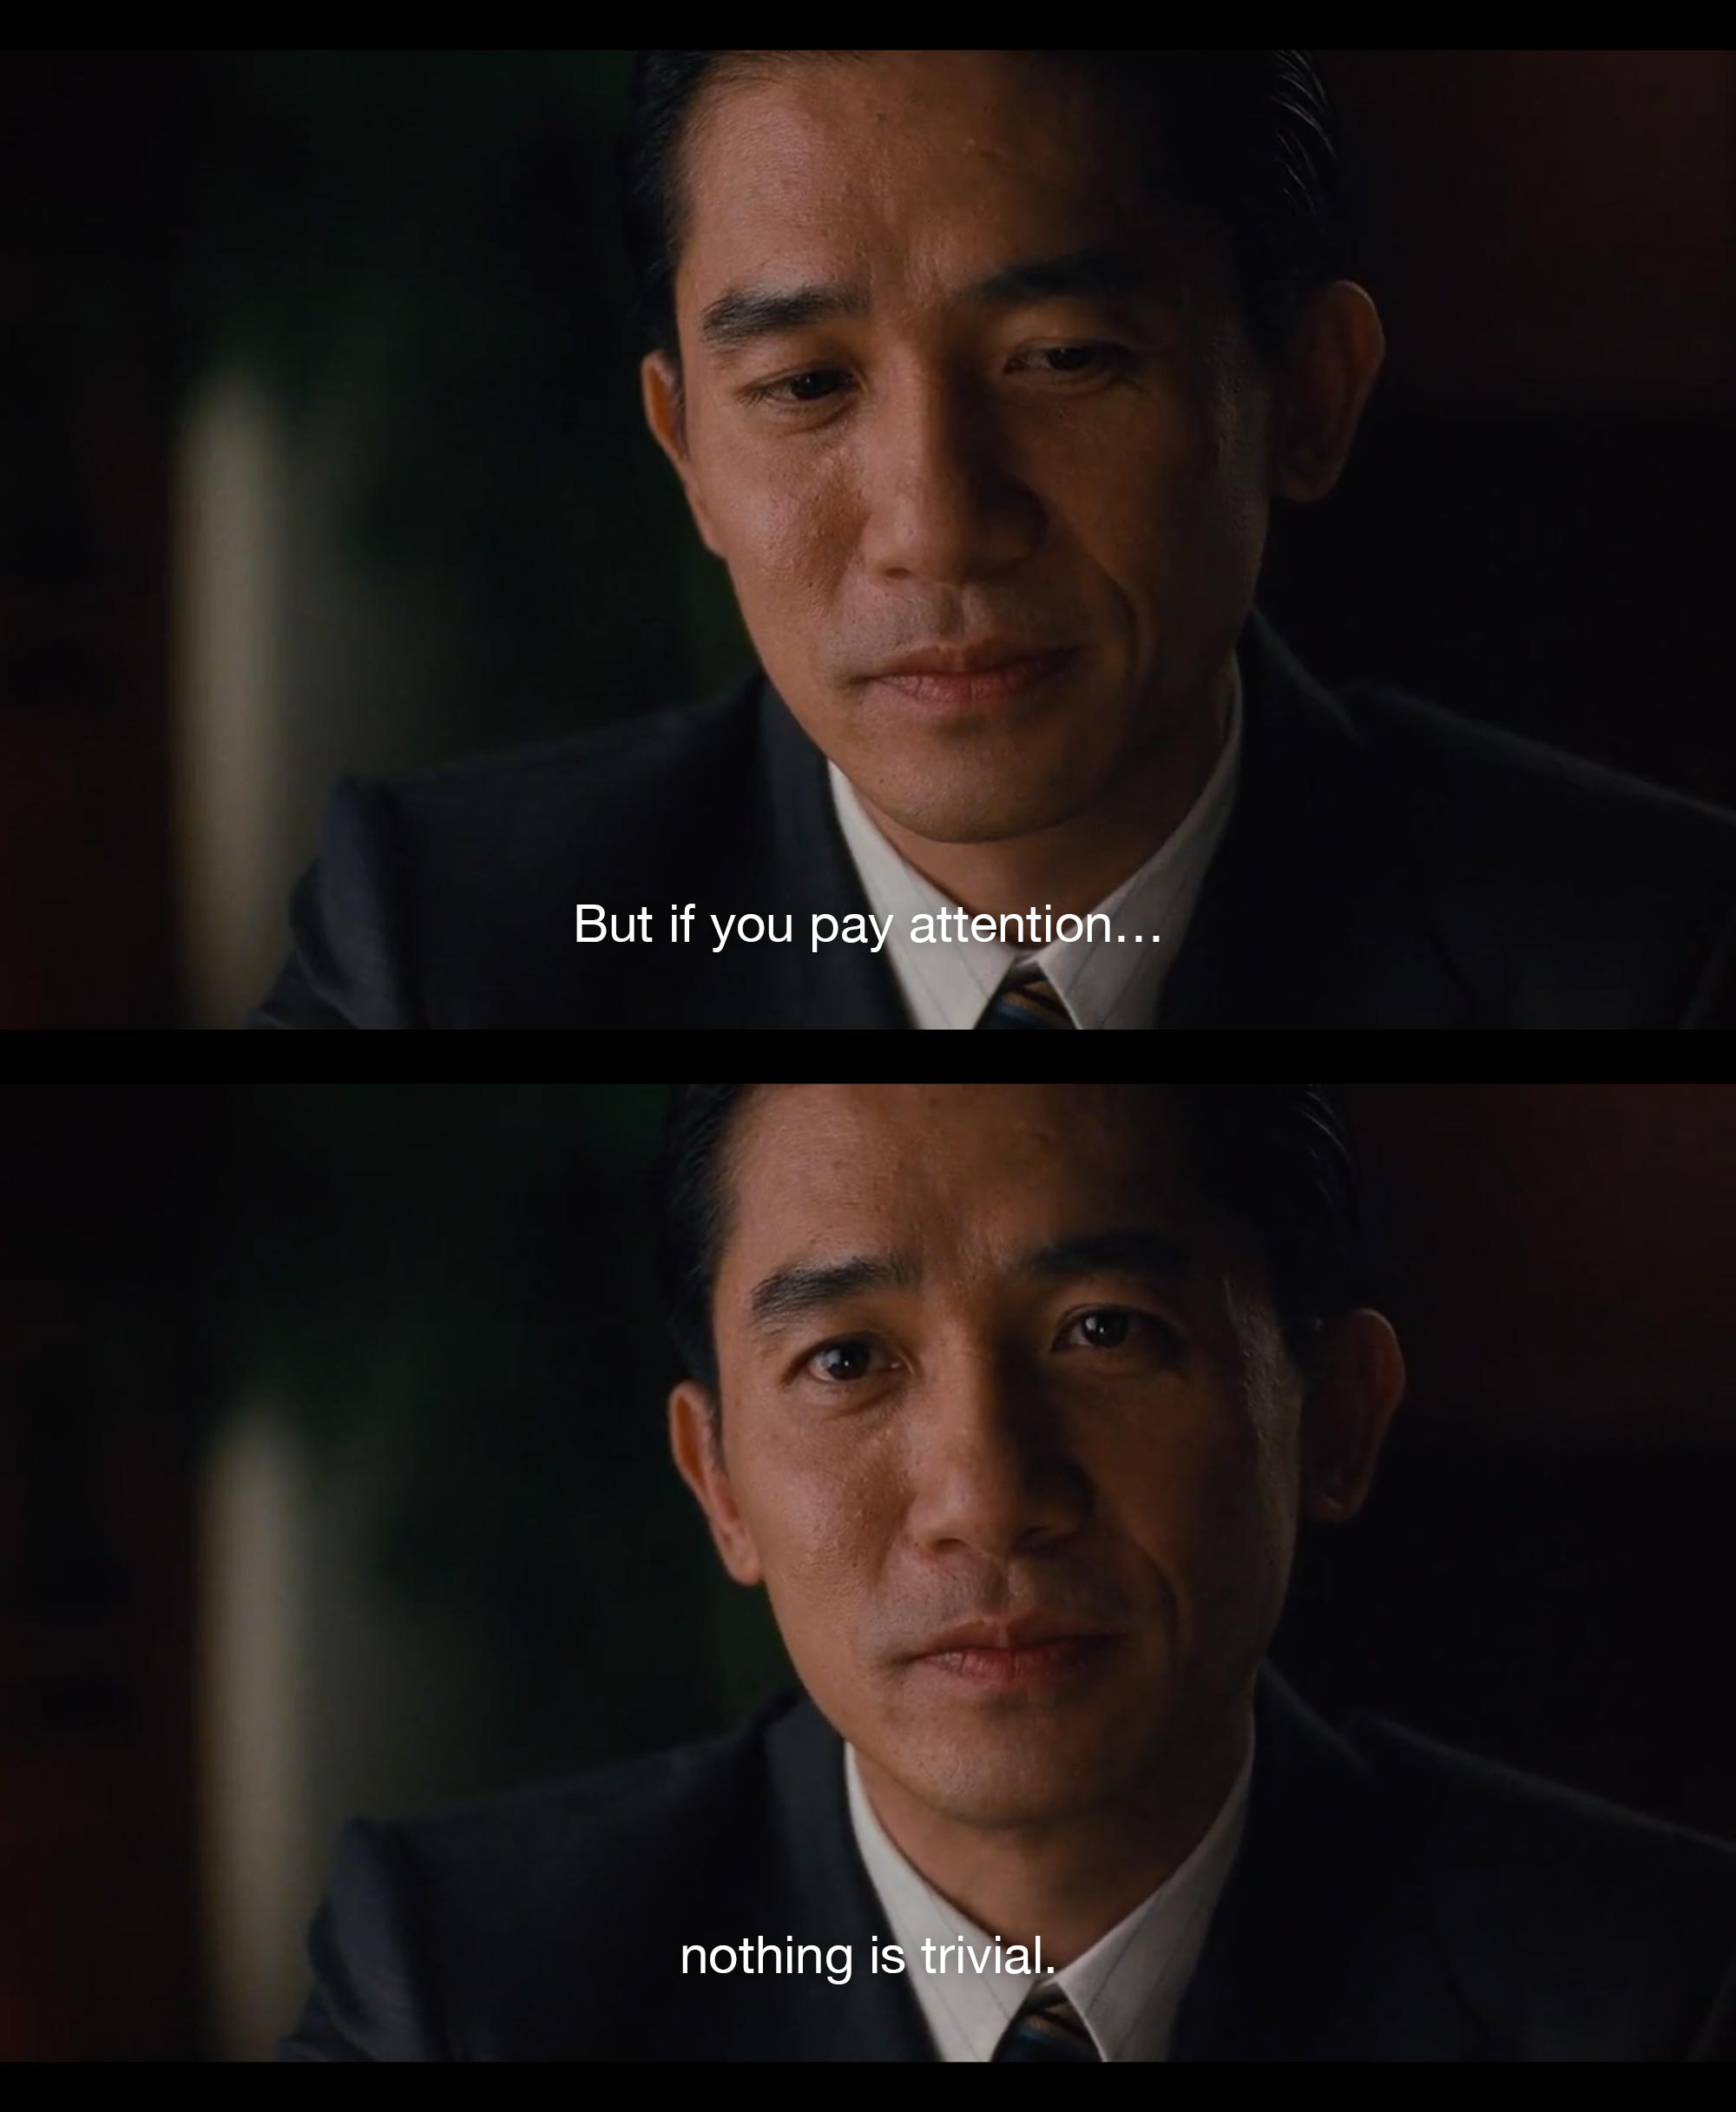 Ang Lee, “Lust, Caution”, 2007